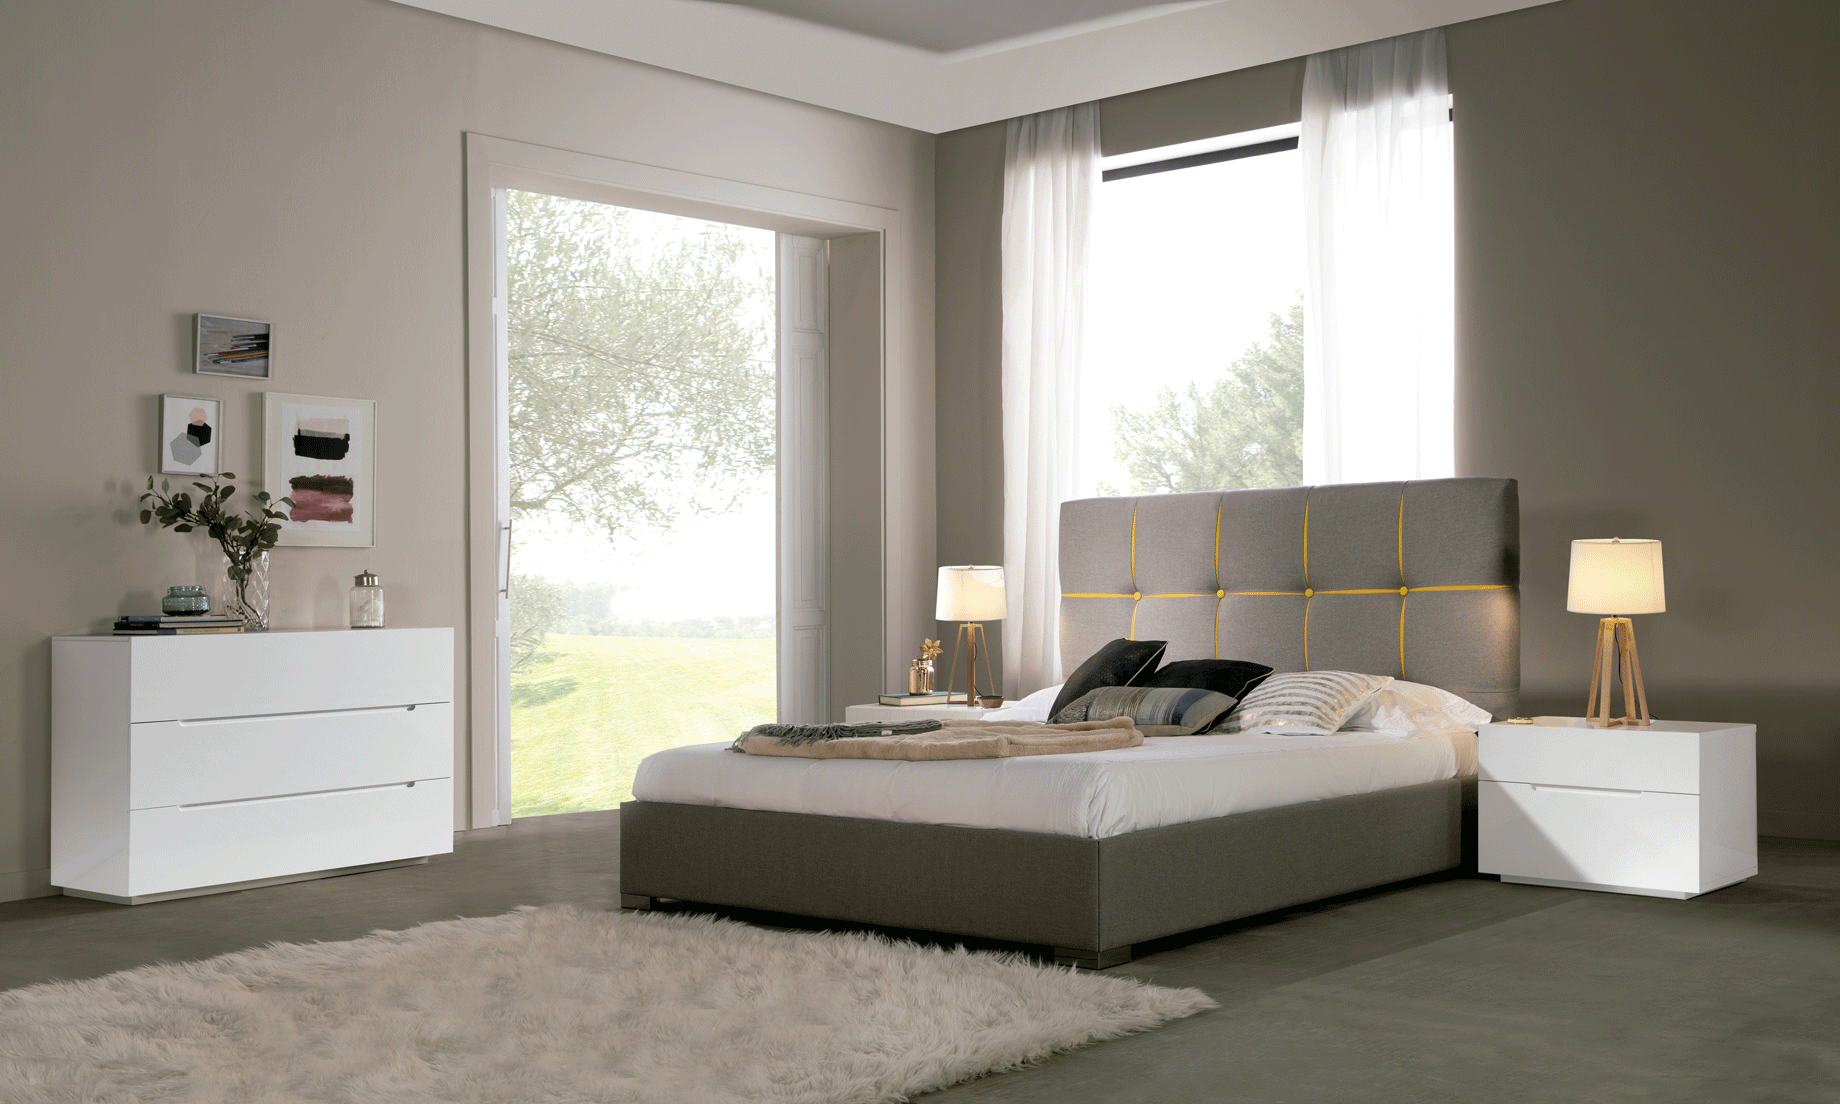 Bedroom Furniture Classic Bedrooms QS and KS Veronica Bedroom with Storage, M100, C100, E100